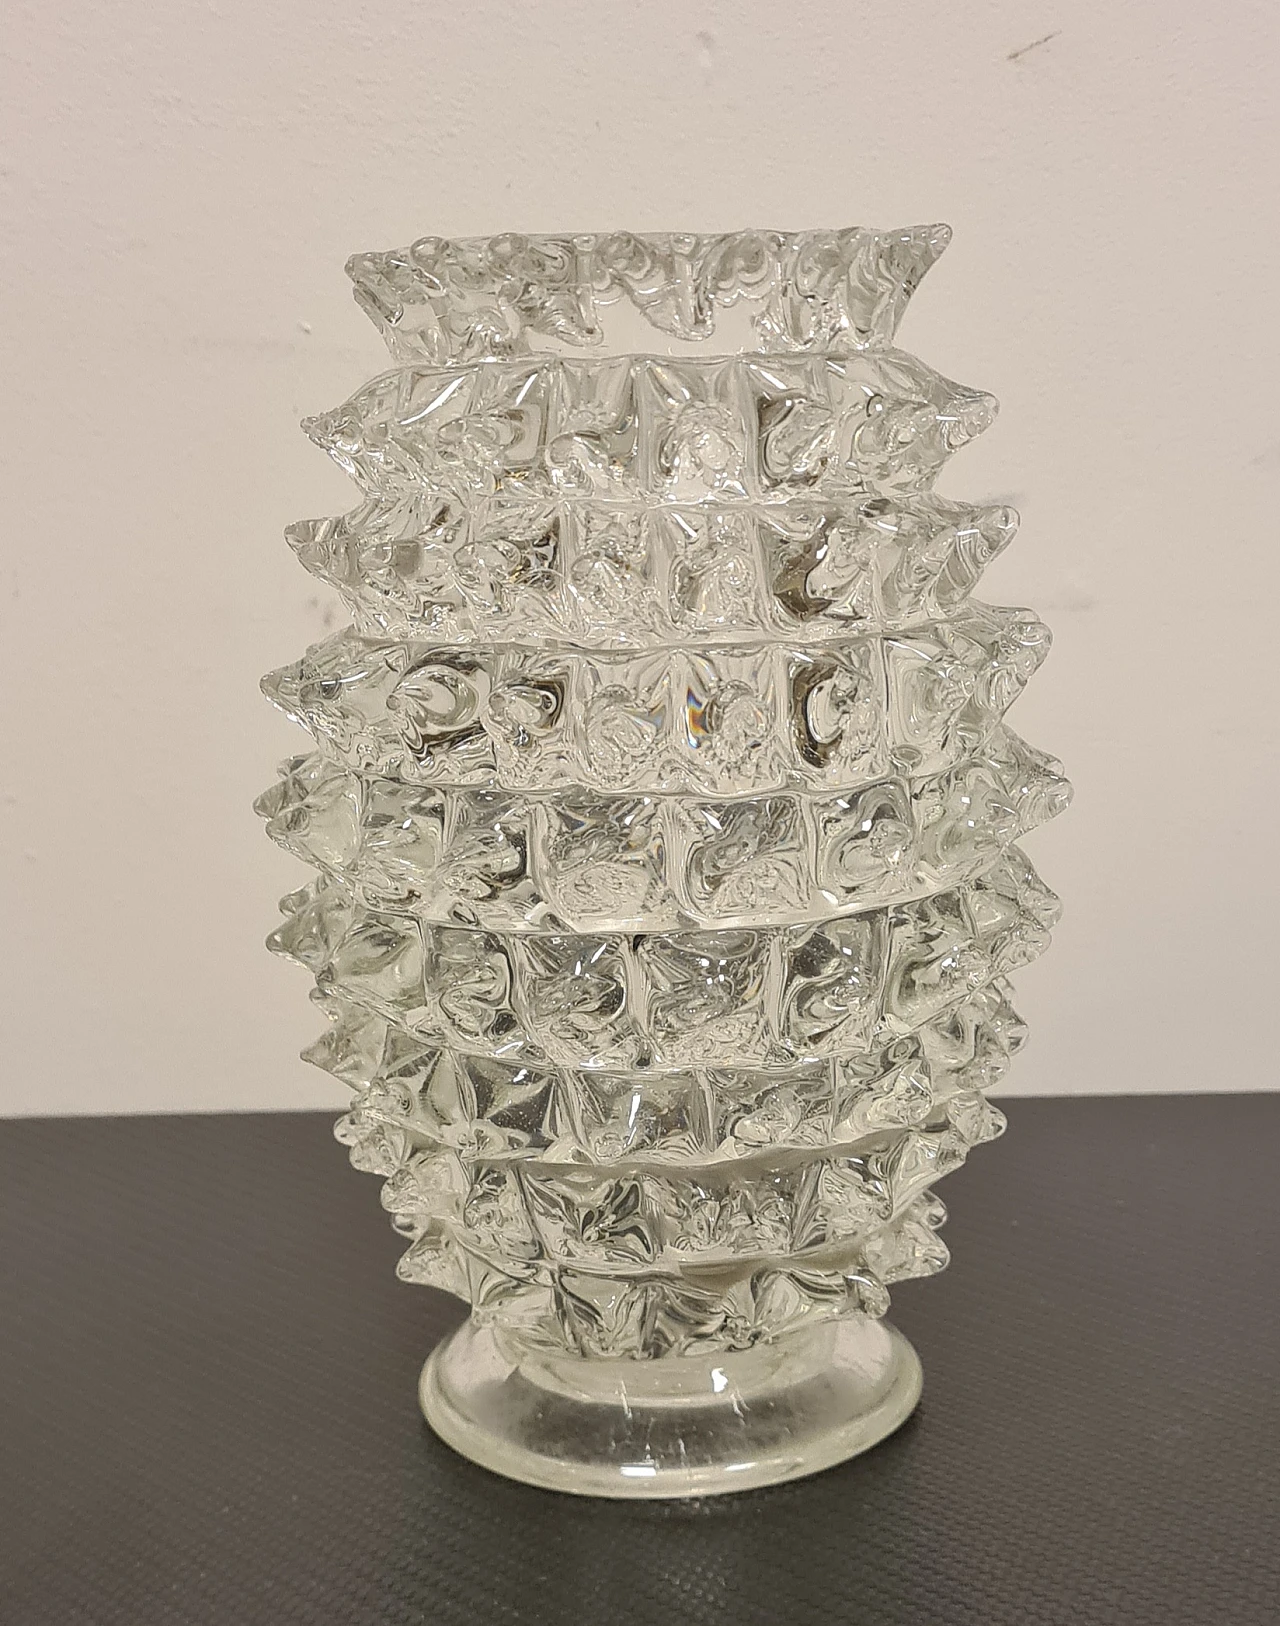 Rostered Murano glass vase by Barovier and Toso, 1940s 21